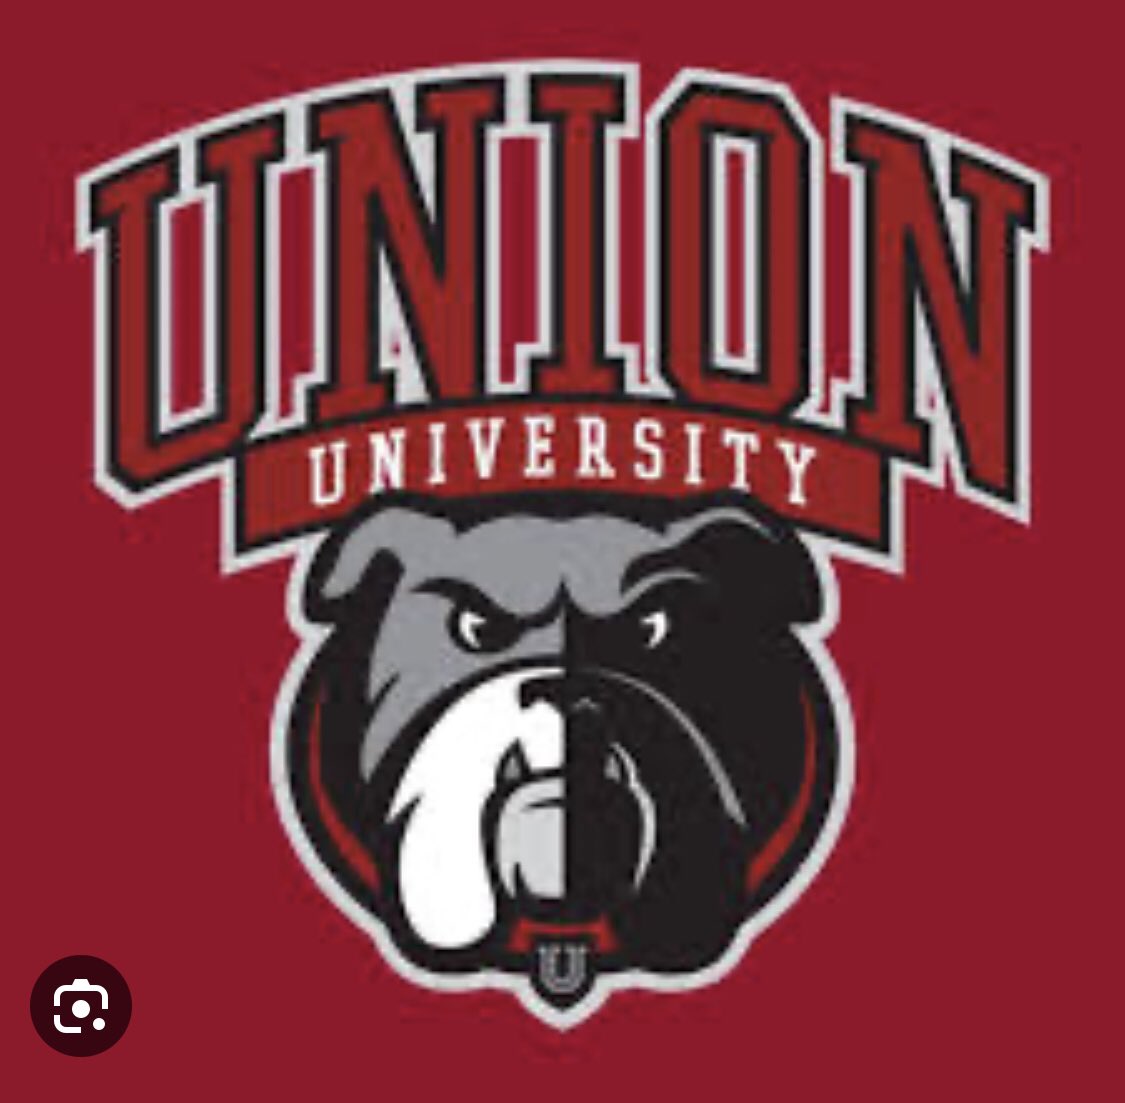 After a great phone call with Coach Campbell yesterday, I am so thankful to receive an offer from @UUAthleticsWB. Thank you so much Coach Campbell and @Seanb__12 for believing in me. @AlSoStarz_Veal @3G_Reps @ctippslchs